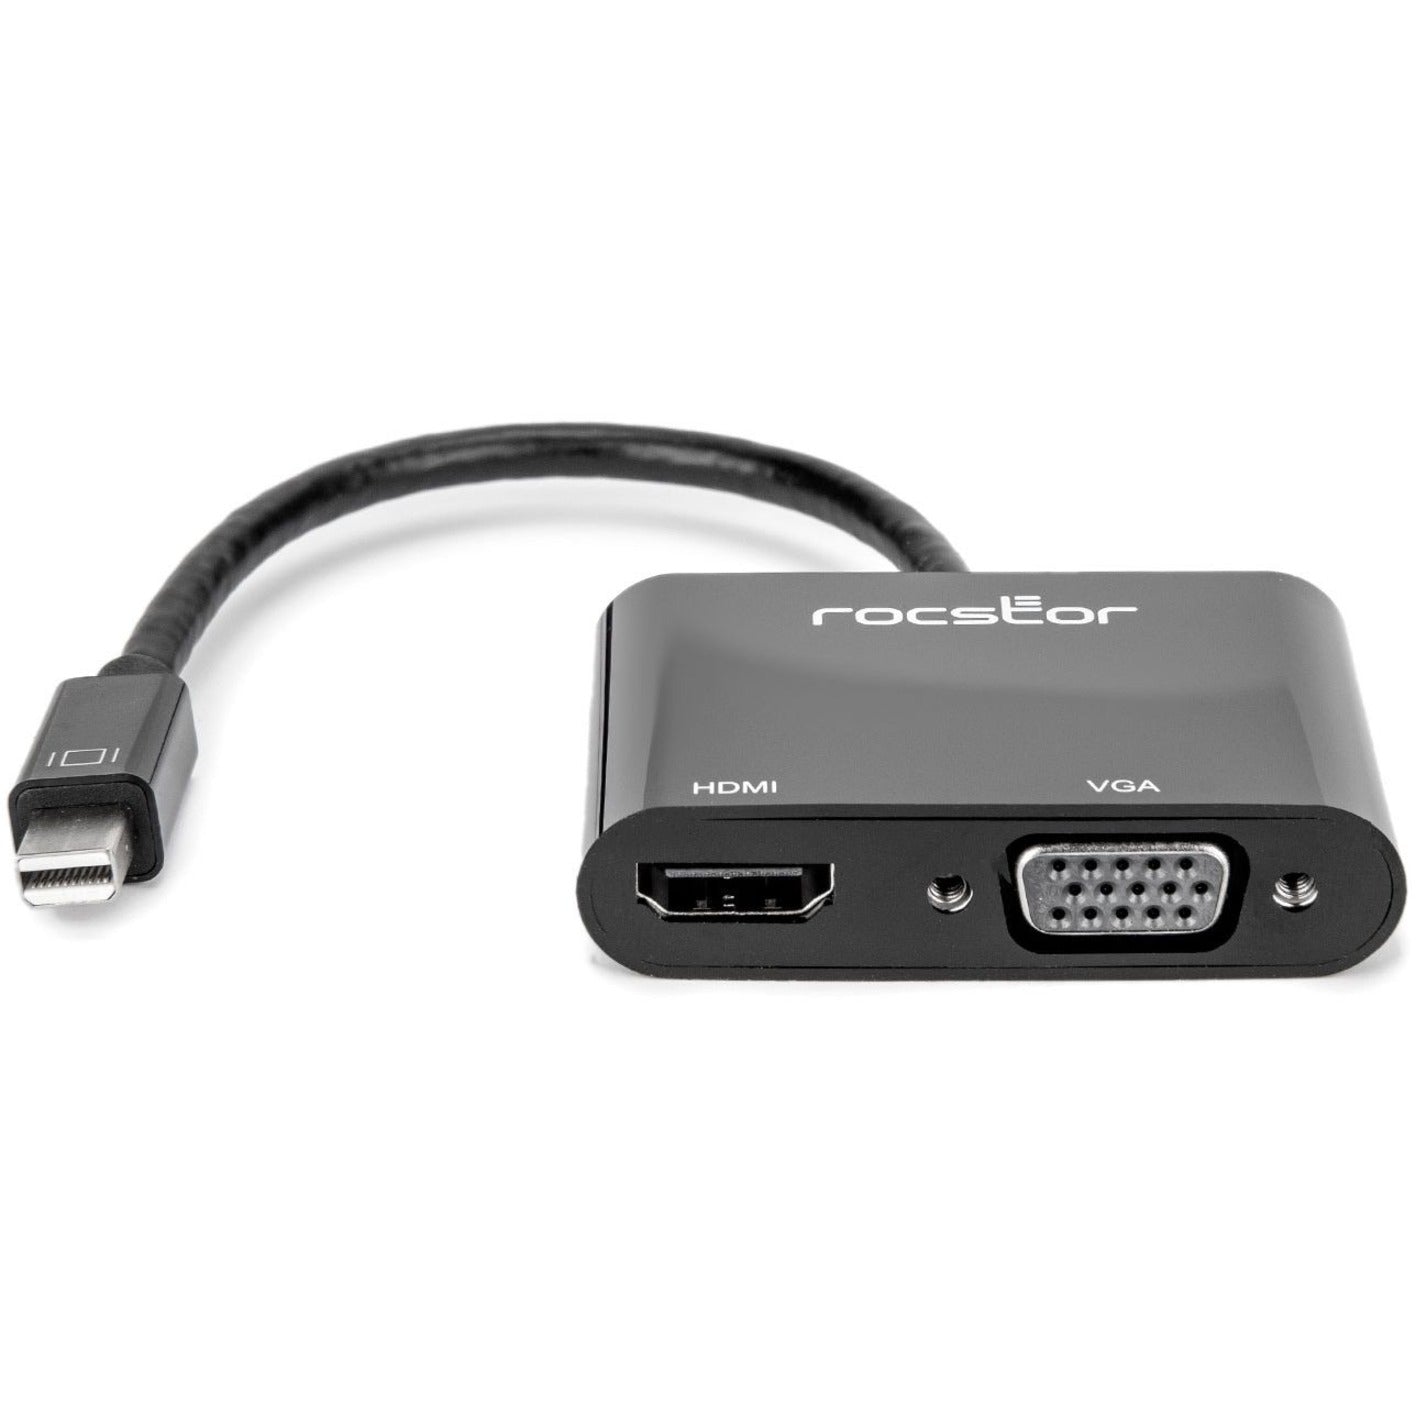 Rocstor Y10A261-B1 Premium 2-in-1 Mini DisplayPort to HDMI 4K 30Hz or VGA Adapter Converter, Plug and Play, 3-Year Warranty